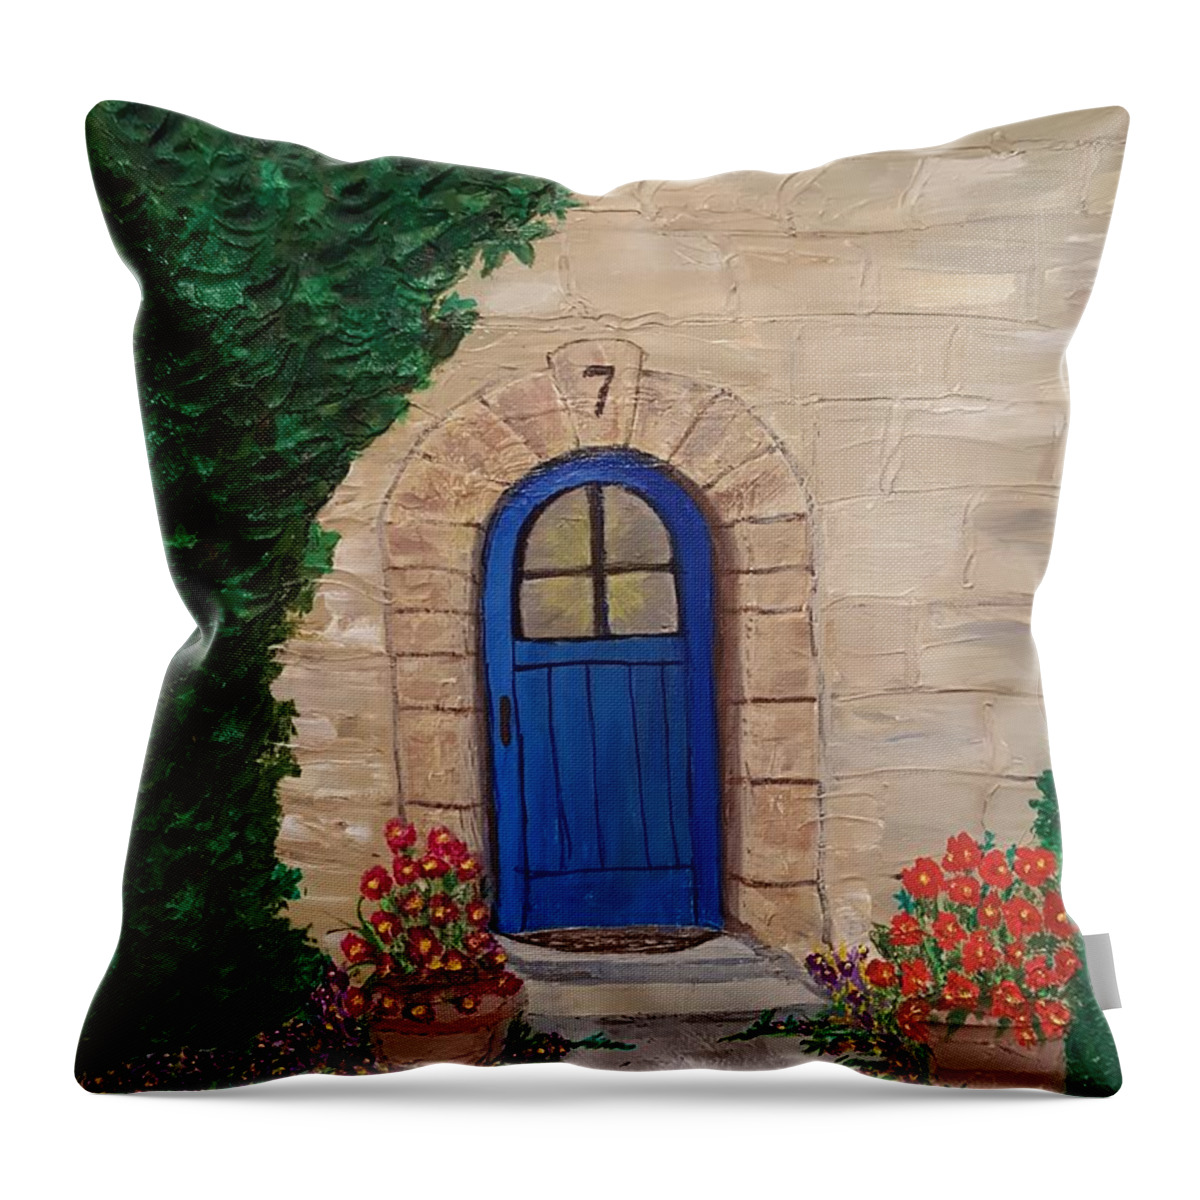 Doors Throw Pillow featuring the painting Blue Door by Elizabeth Mauldin